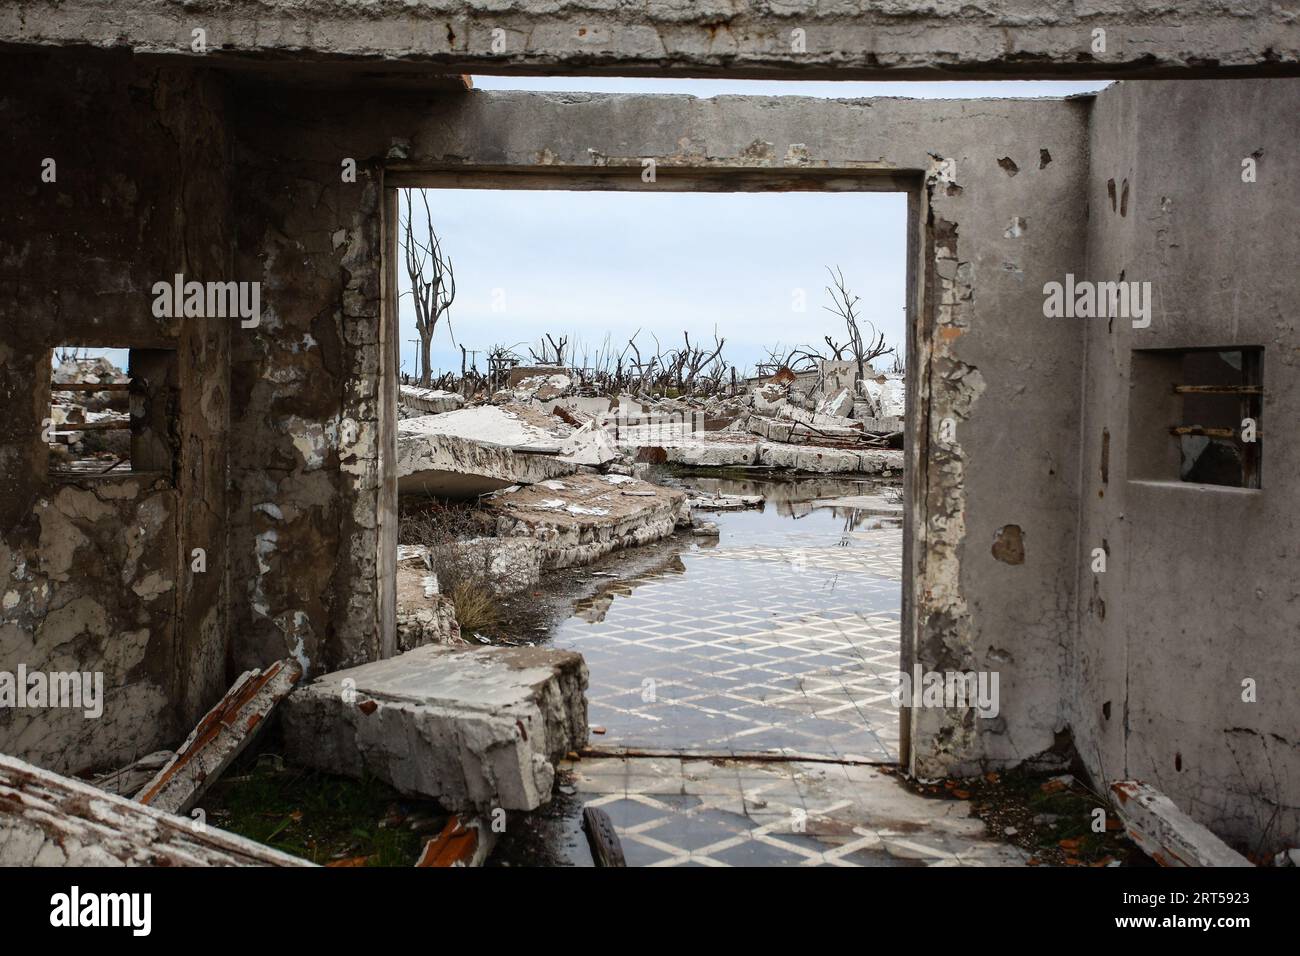 Entrance of a house with a view of the ruins of Epecuen. Epecuen is the name of a ruinous Argentine tourist town, located 7 km from Carhue, in the district of Adolfo Alsina, province of Buenos Aires. The city was founded in 1921 on the shores of the lake of the same name, it had around 1,500 habitants and was visited by an average of 25,000 tourists during the summer. Its waters are attributed healing properties due to the high level of salinity, which was a tourist attraction in those years. In 1985, a flood caused by the flooding of the lake left the town completely underwater, forcing the Stock Photo